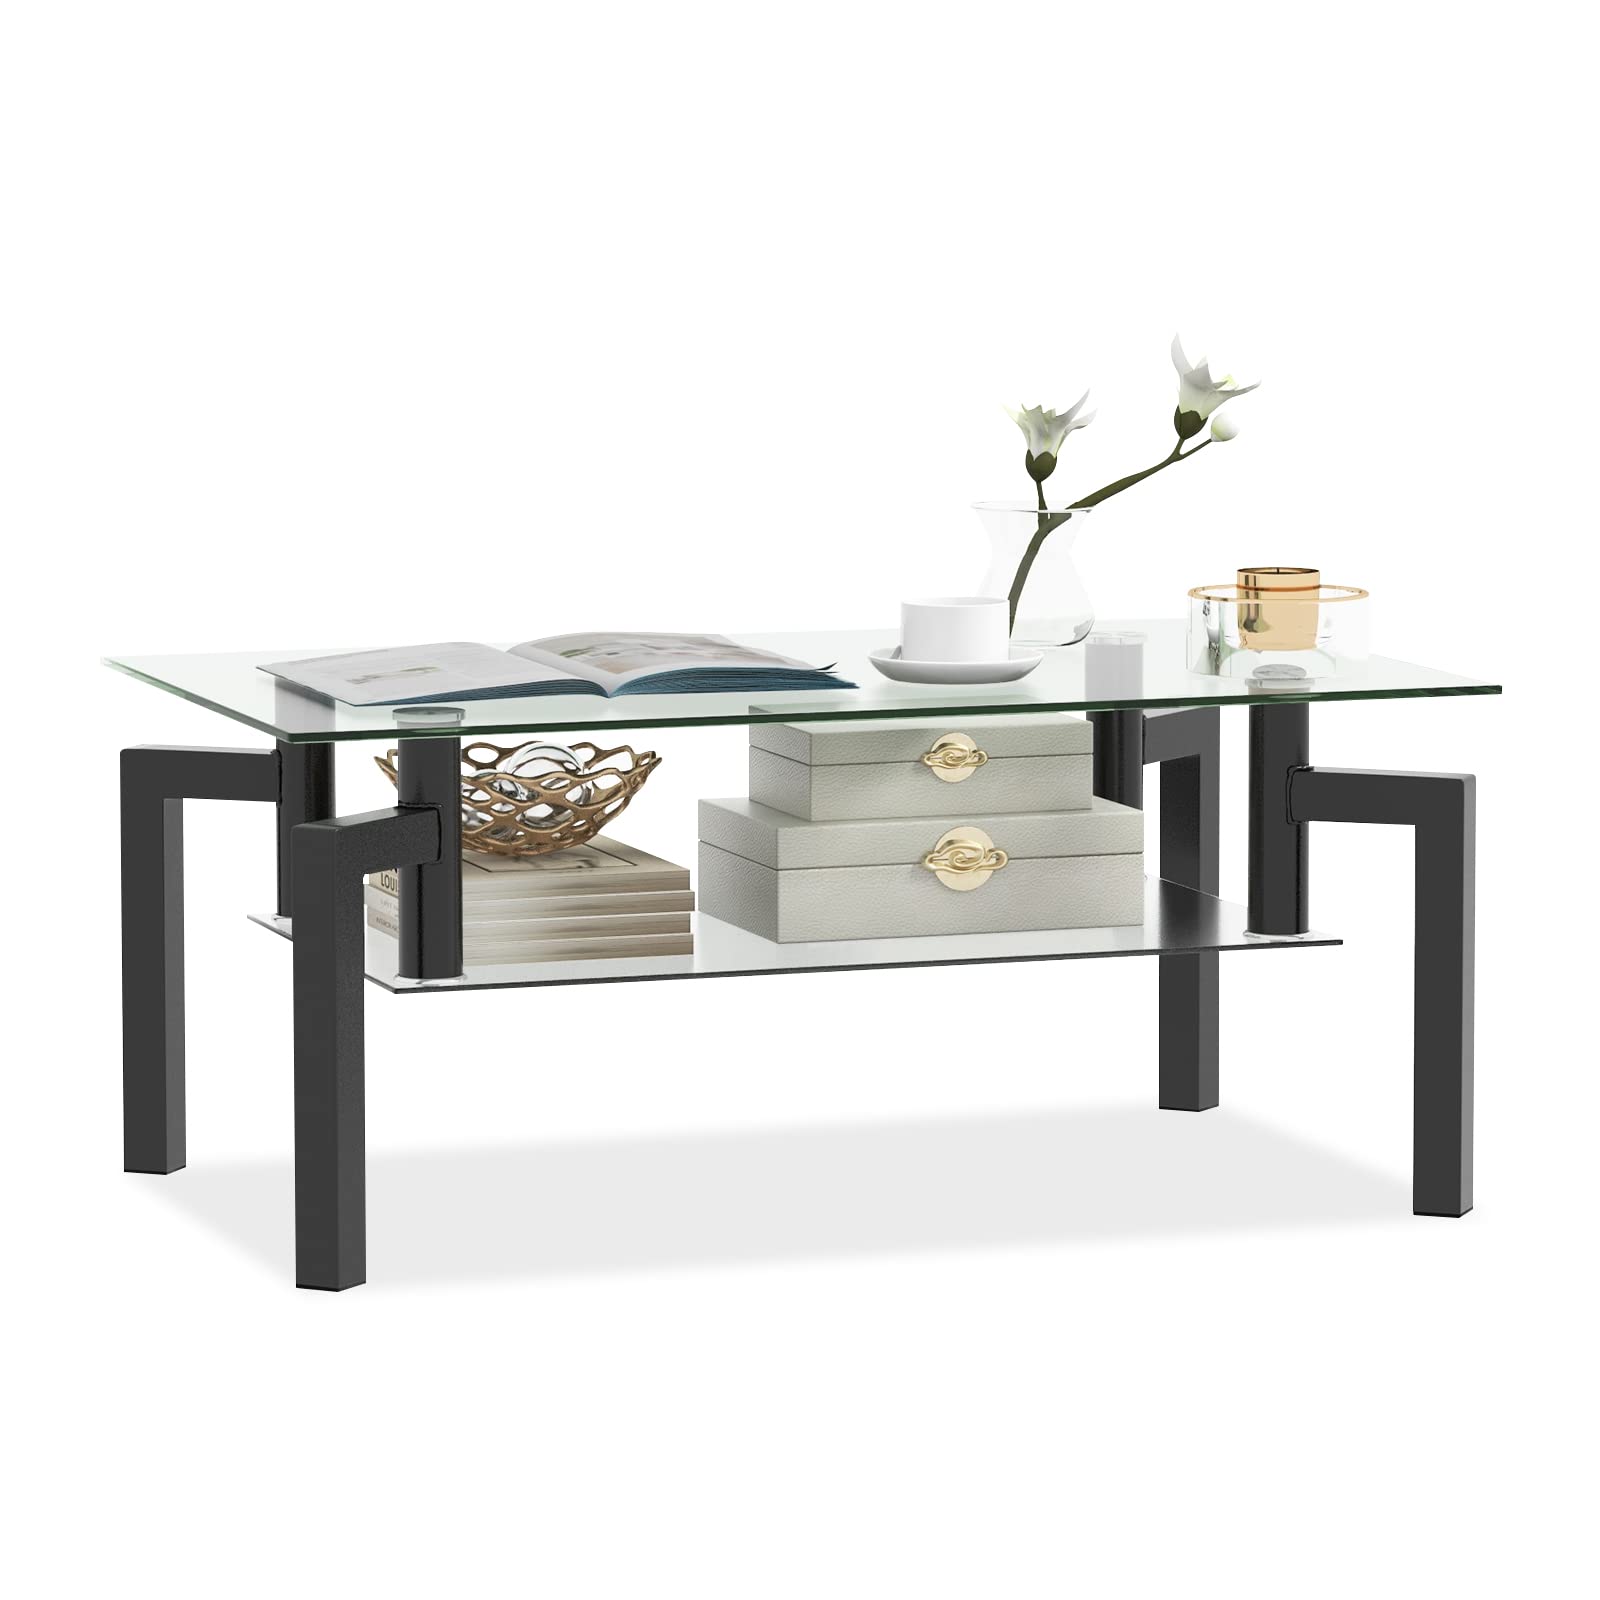 Giantex 2-Tier Glass Coffee Table - Center Table with Tempered Glass Top & Open Shelf